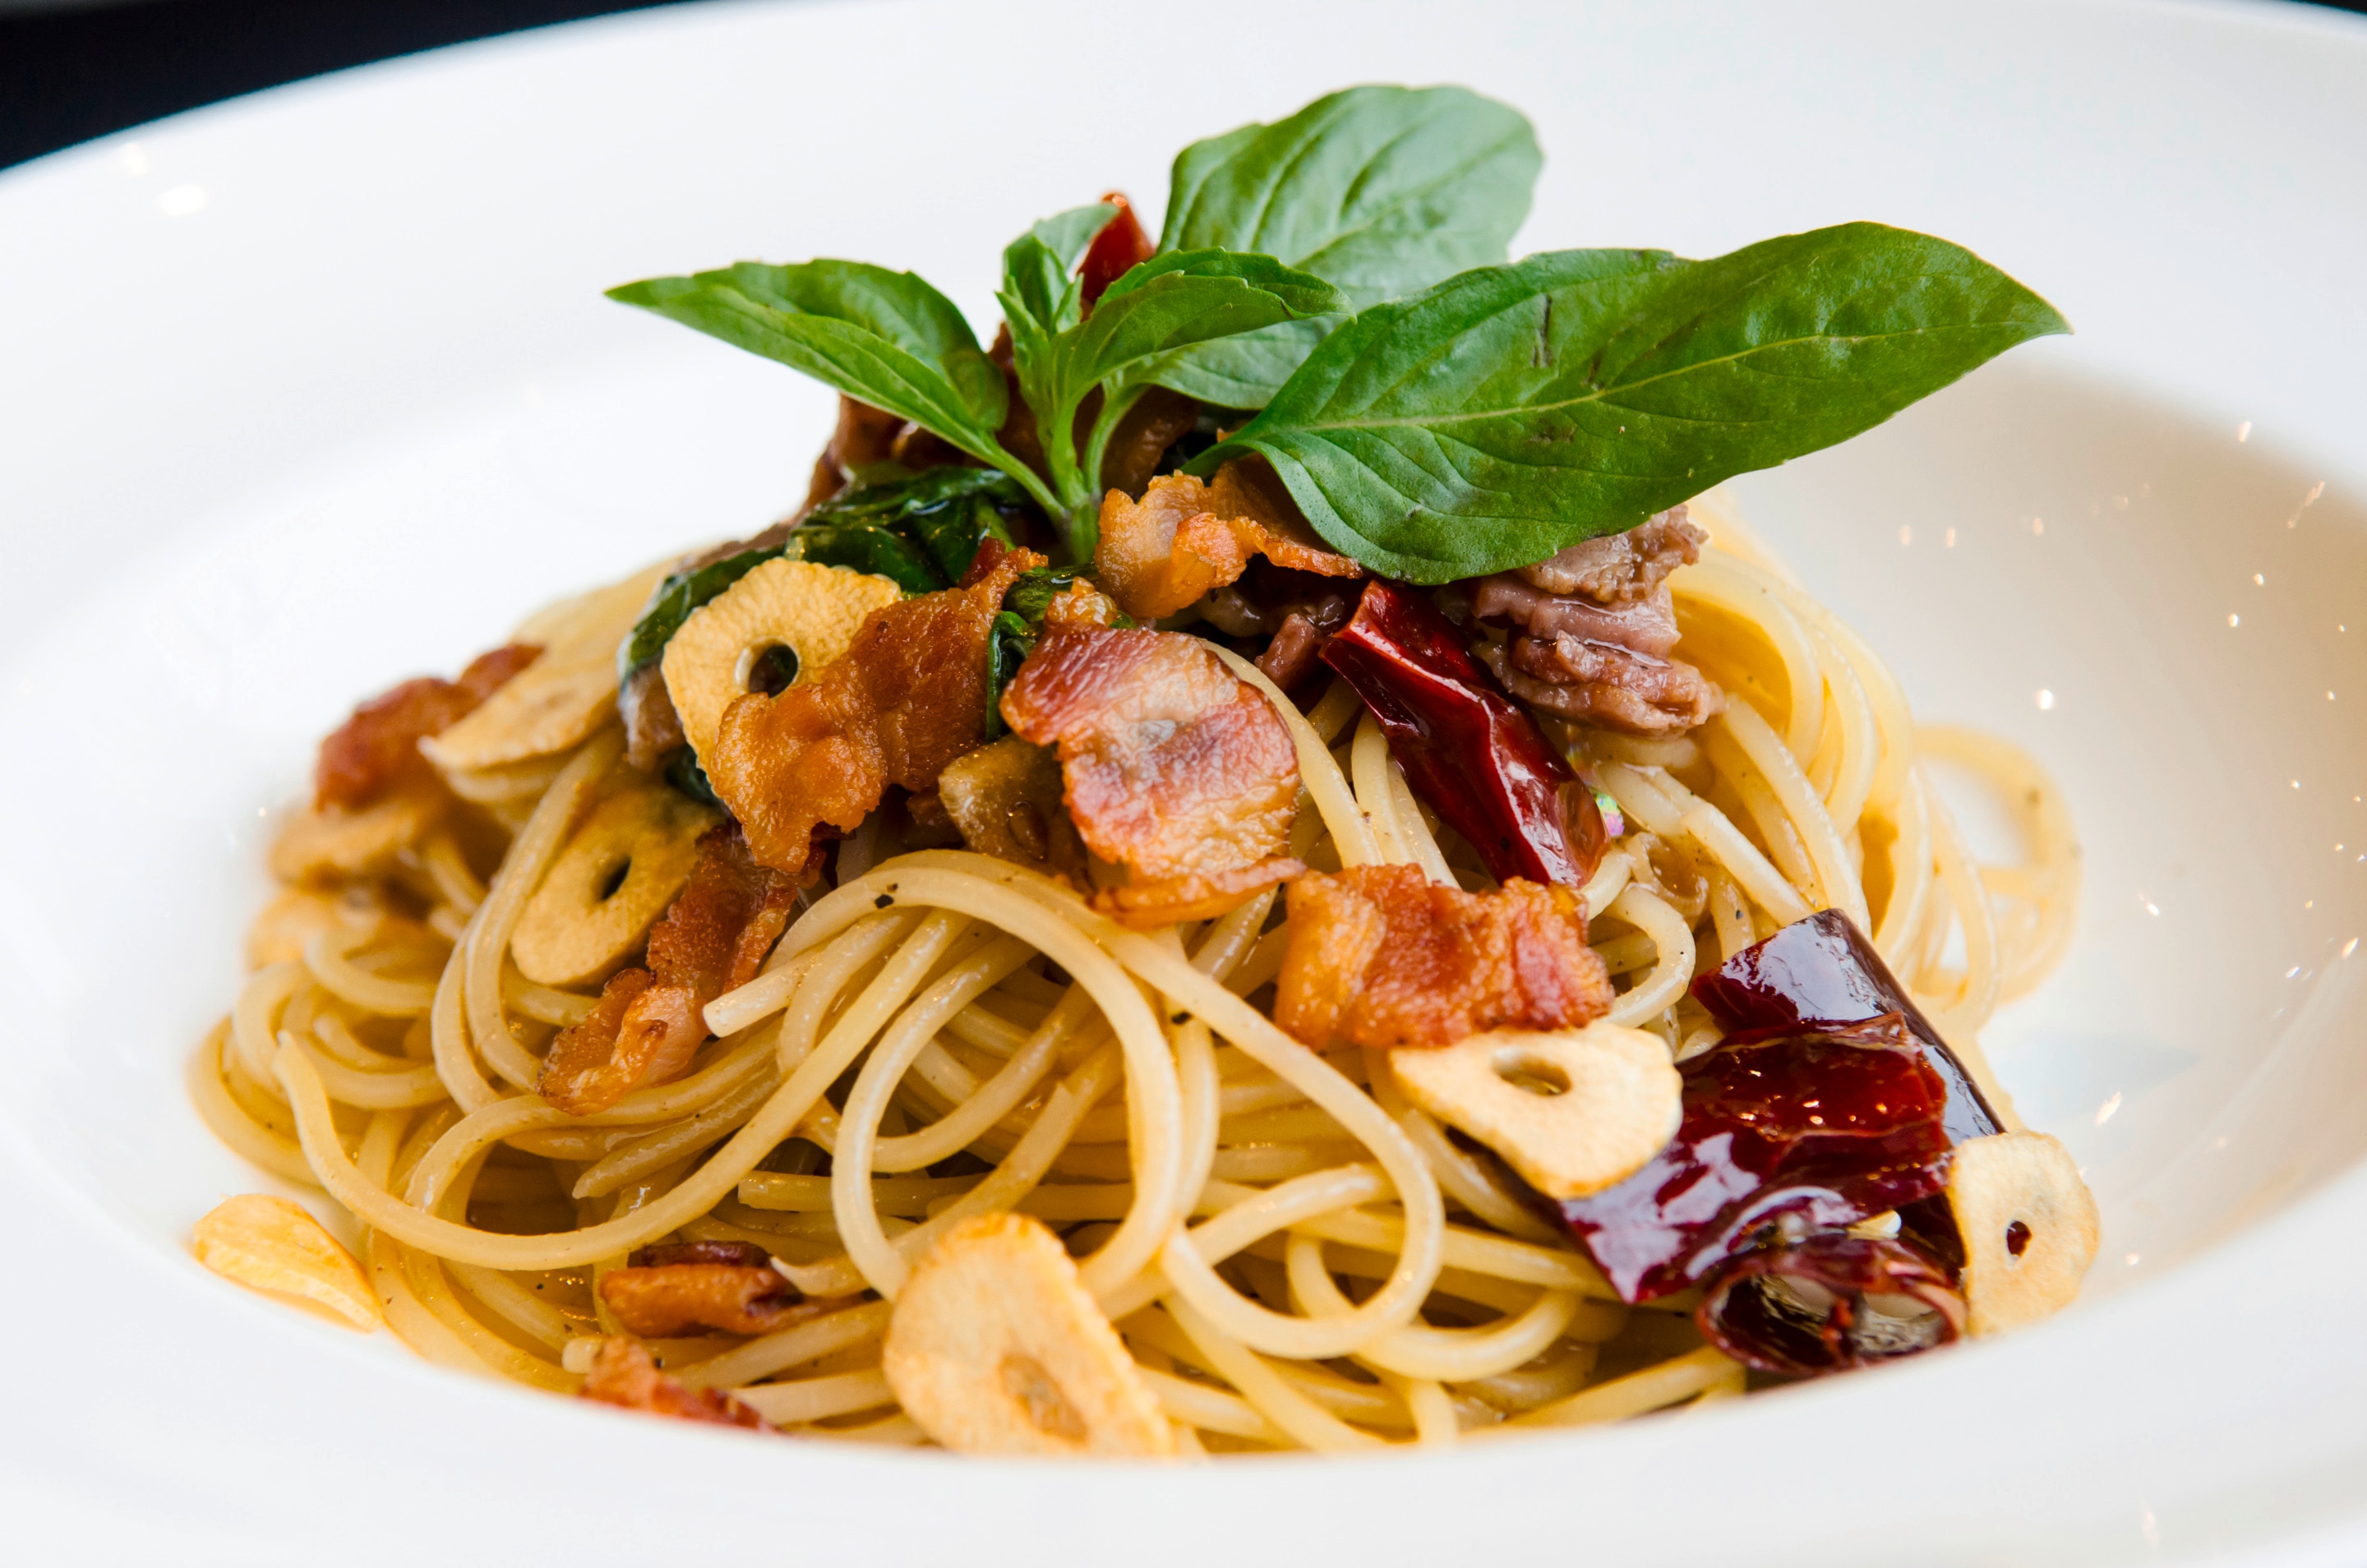 Spaghetti with crispy ham, garlic, and basil served on a white plate